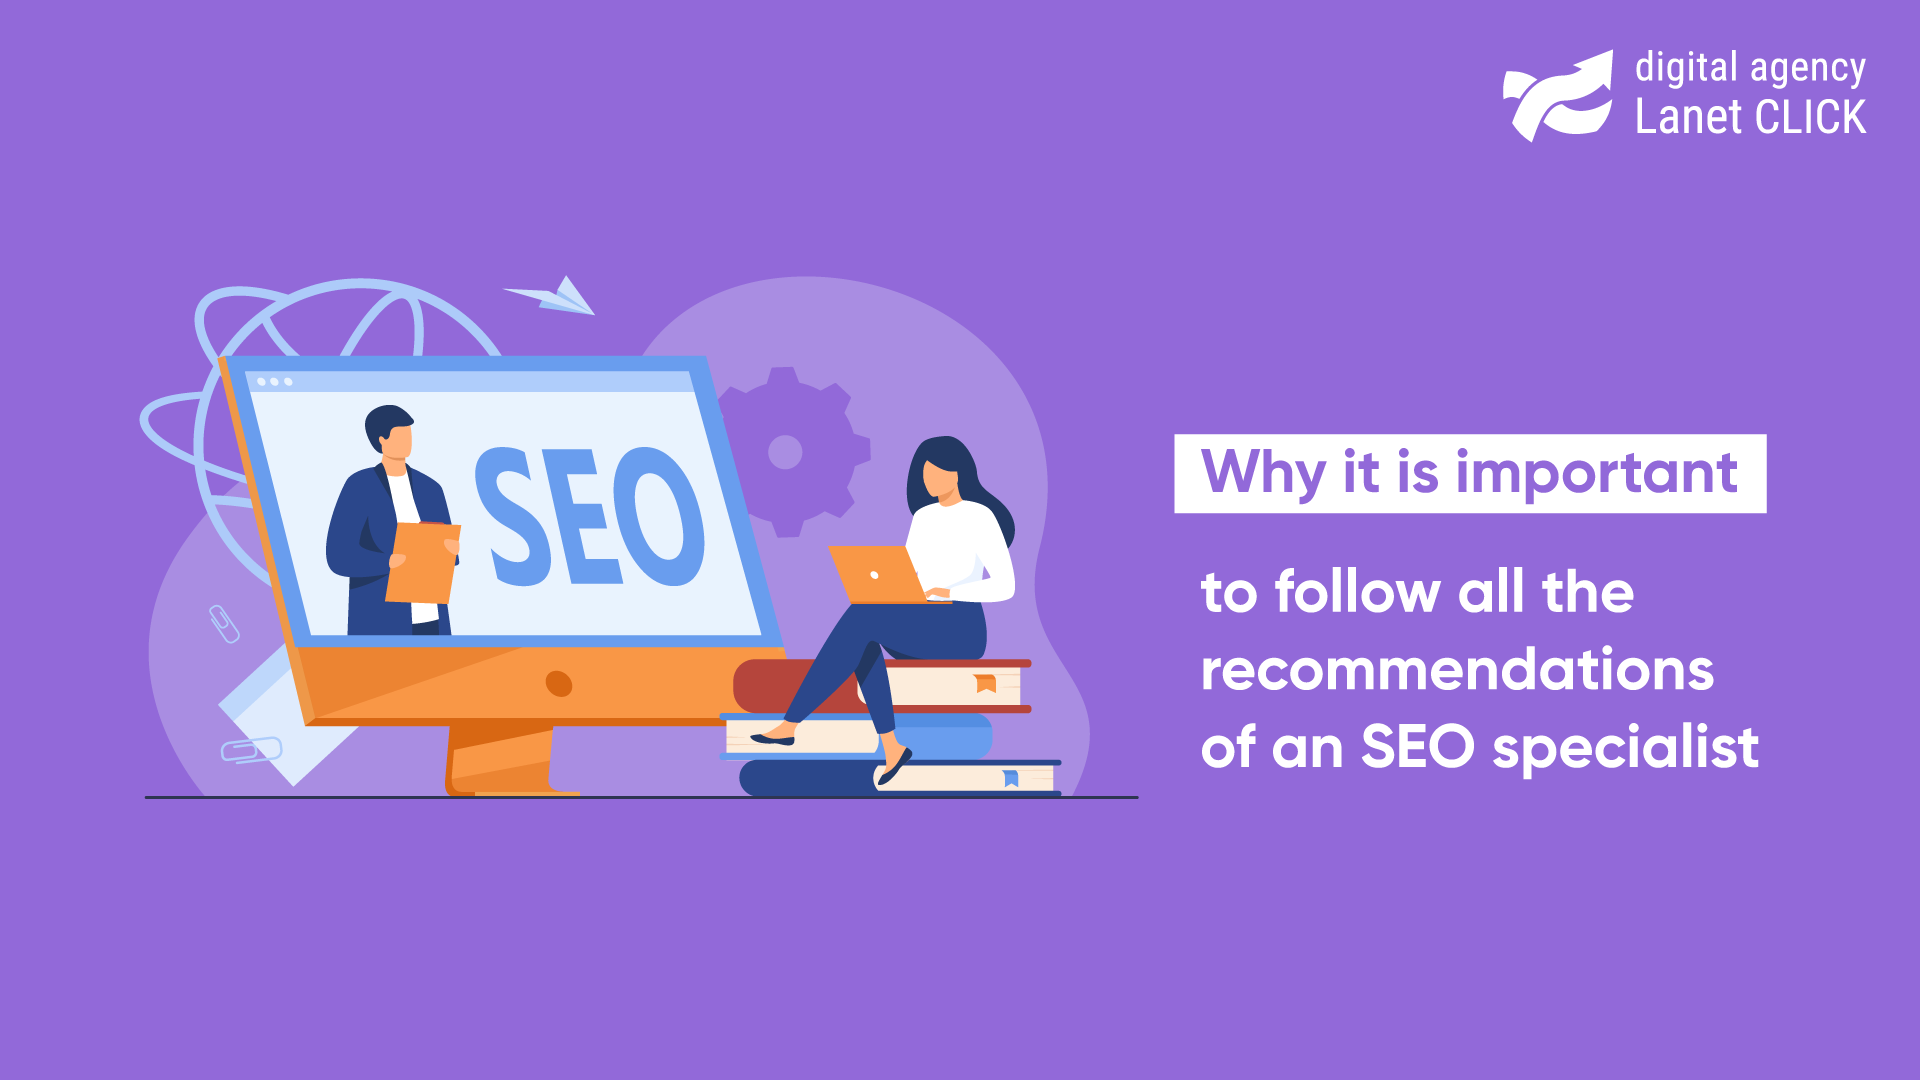 Why is it important to follow all the recommendations of SEO specialist